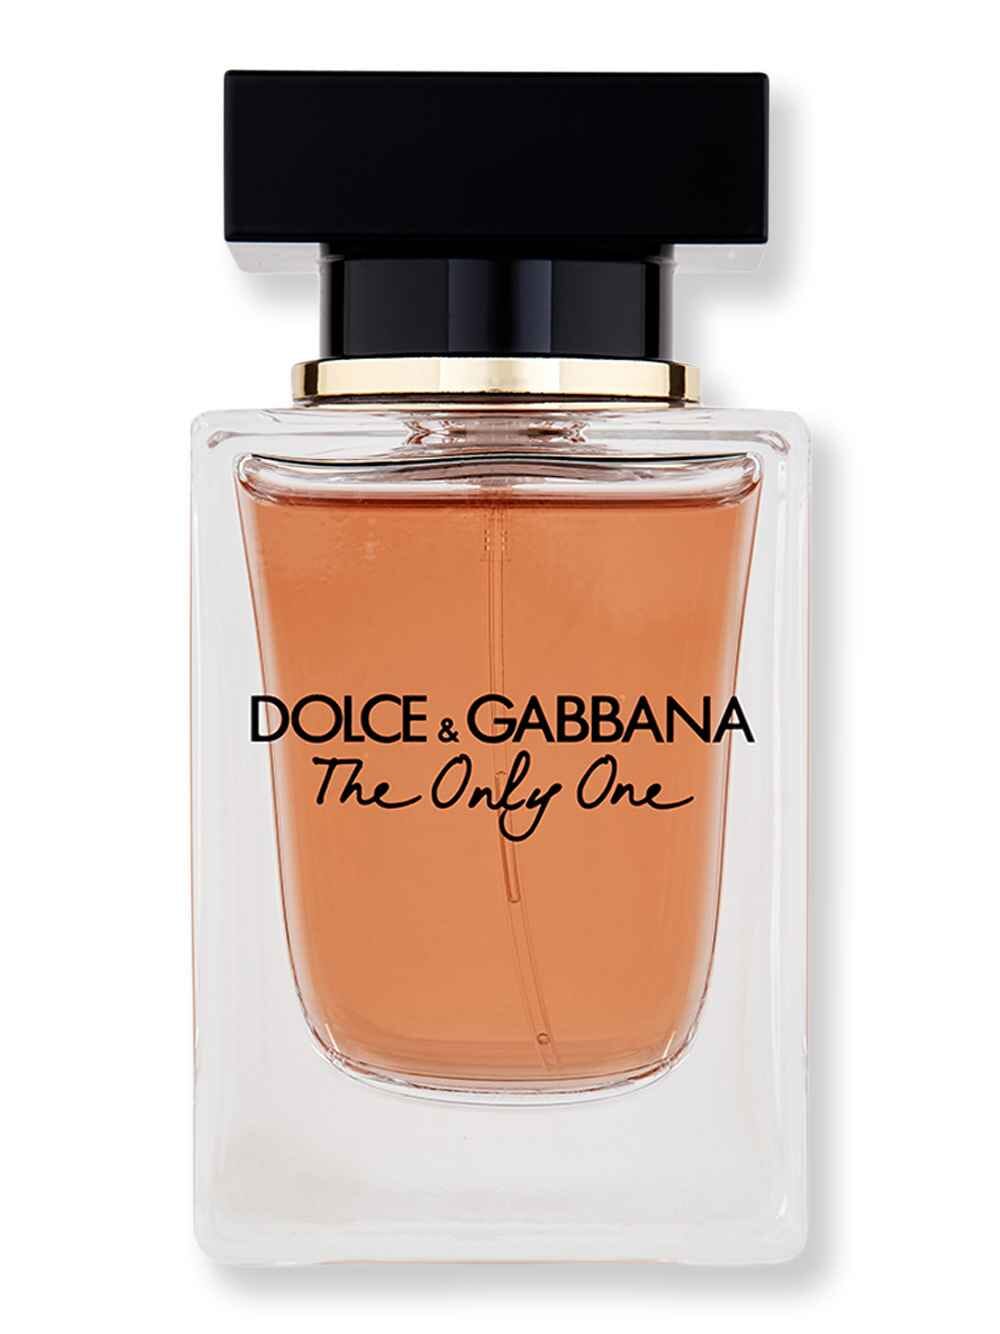 Dolce & Gabbana Dolce & Gabbana The Only One EDP 1.7 oz Perfumes & Colognes 